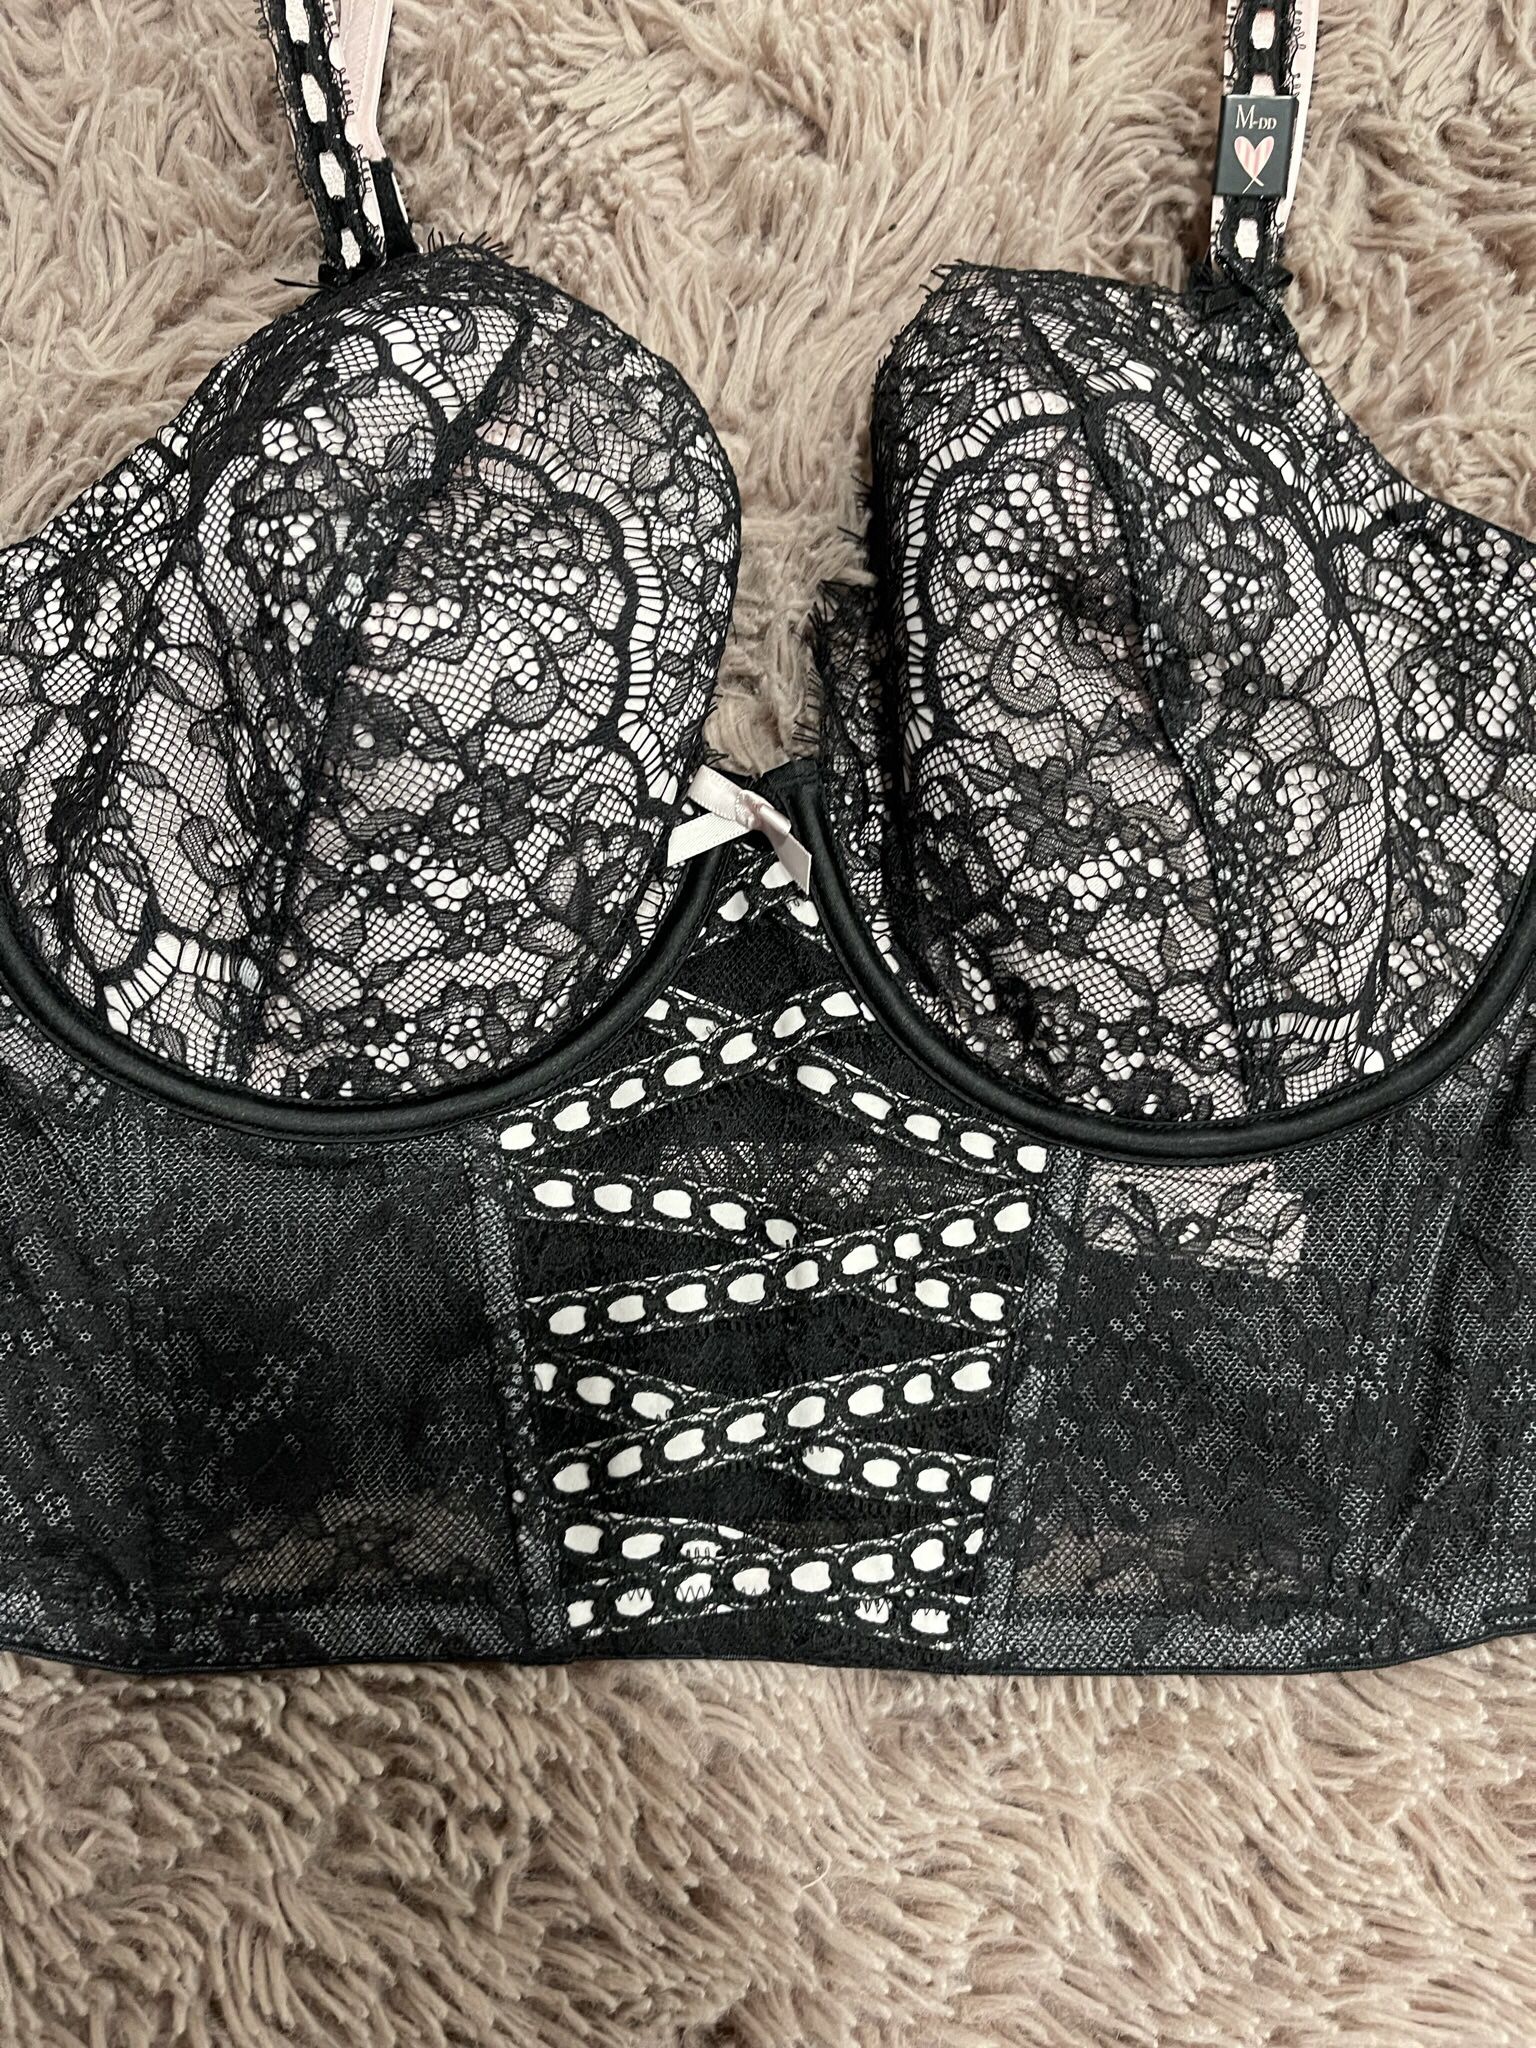 Victoria’s Secret Dream Angels Lace-up Corset Top New for Sale in ...